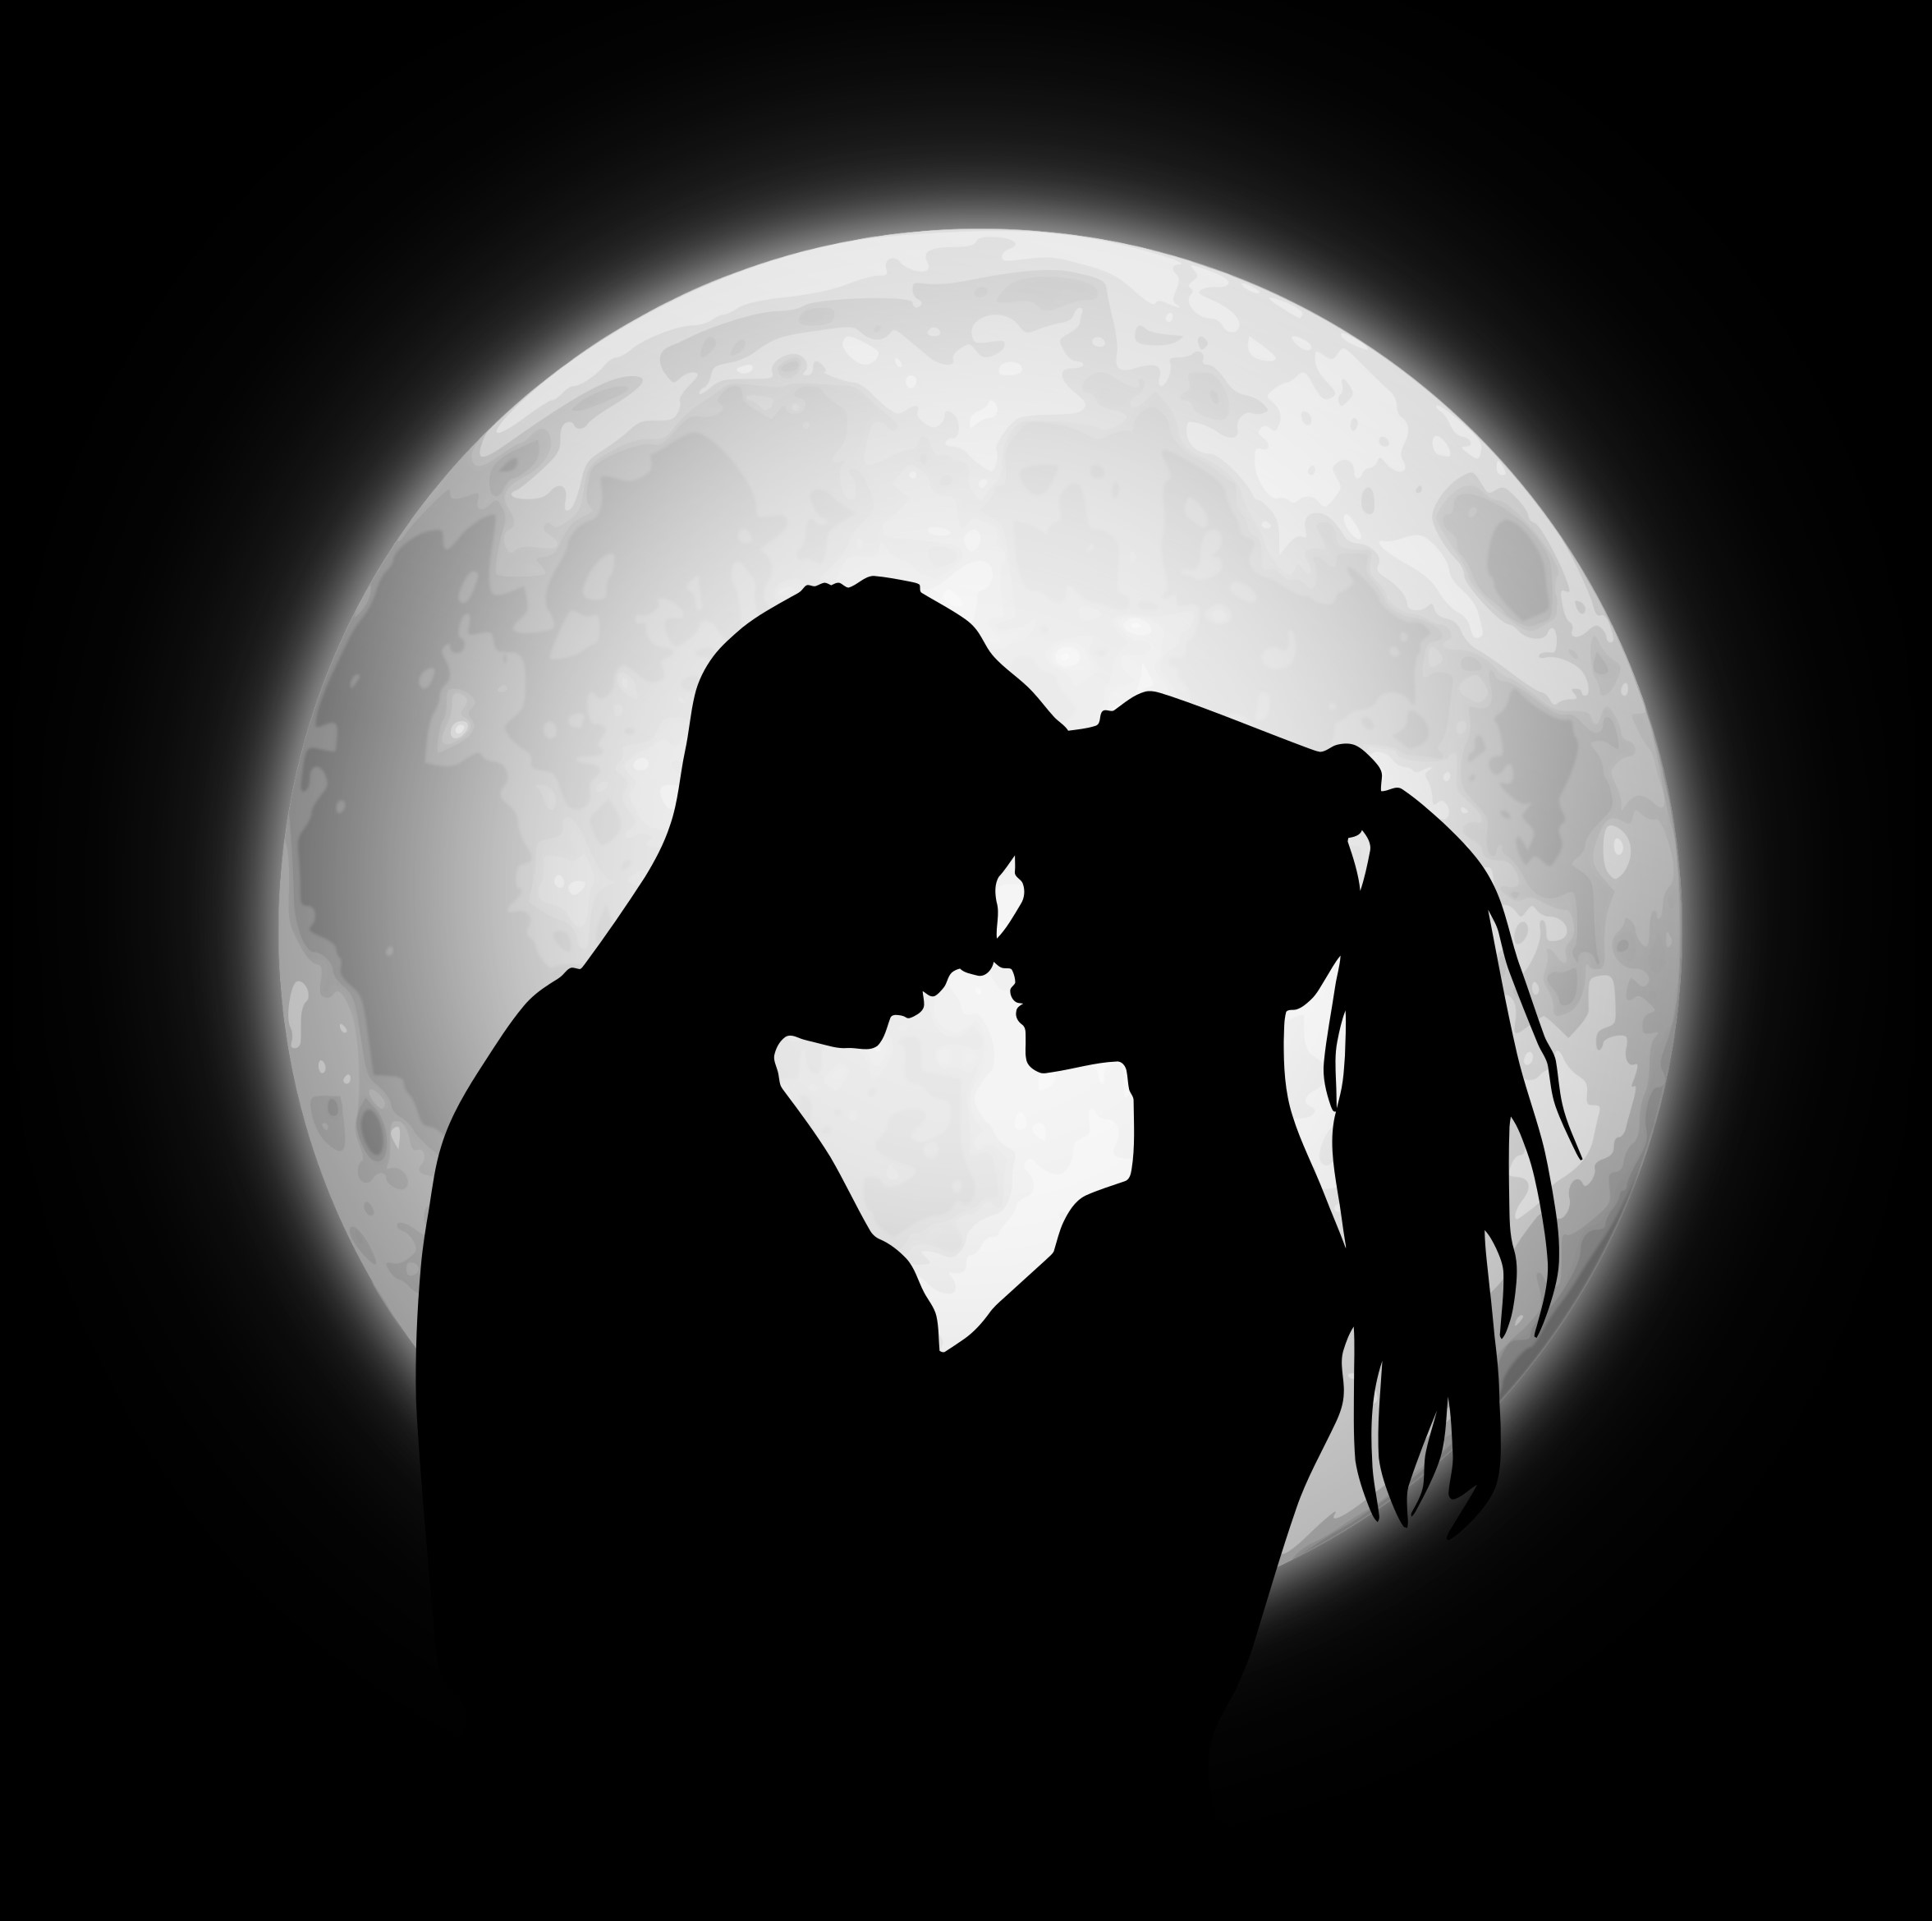 3398460 Couple Silhouettes Moon Love wallpaper Cool